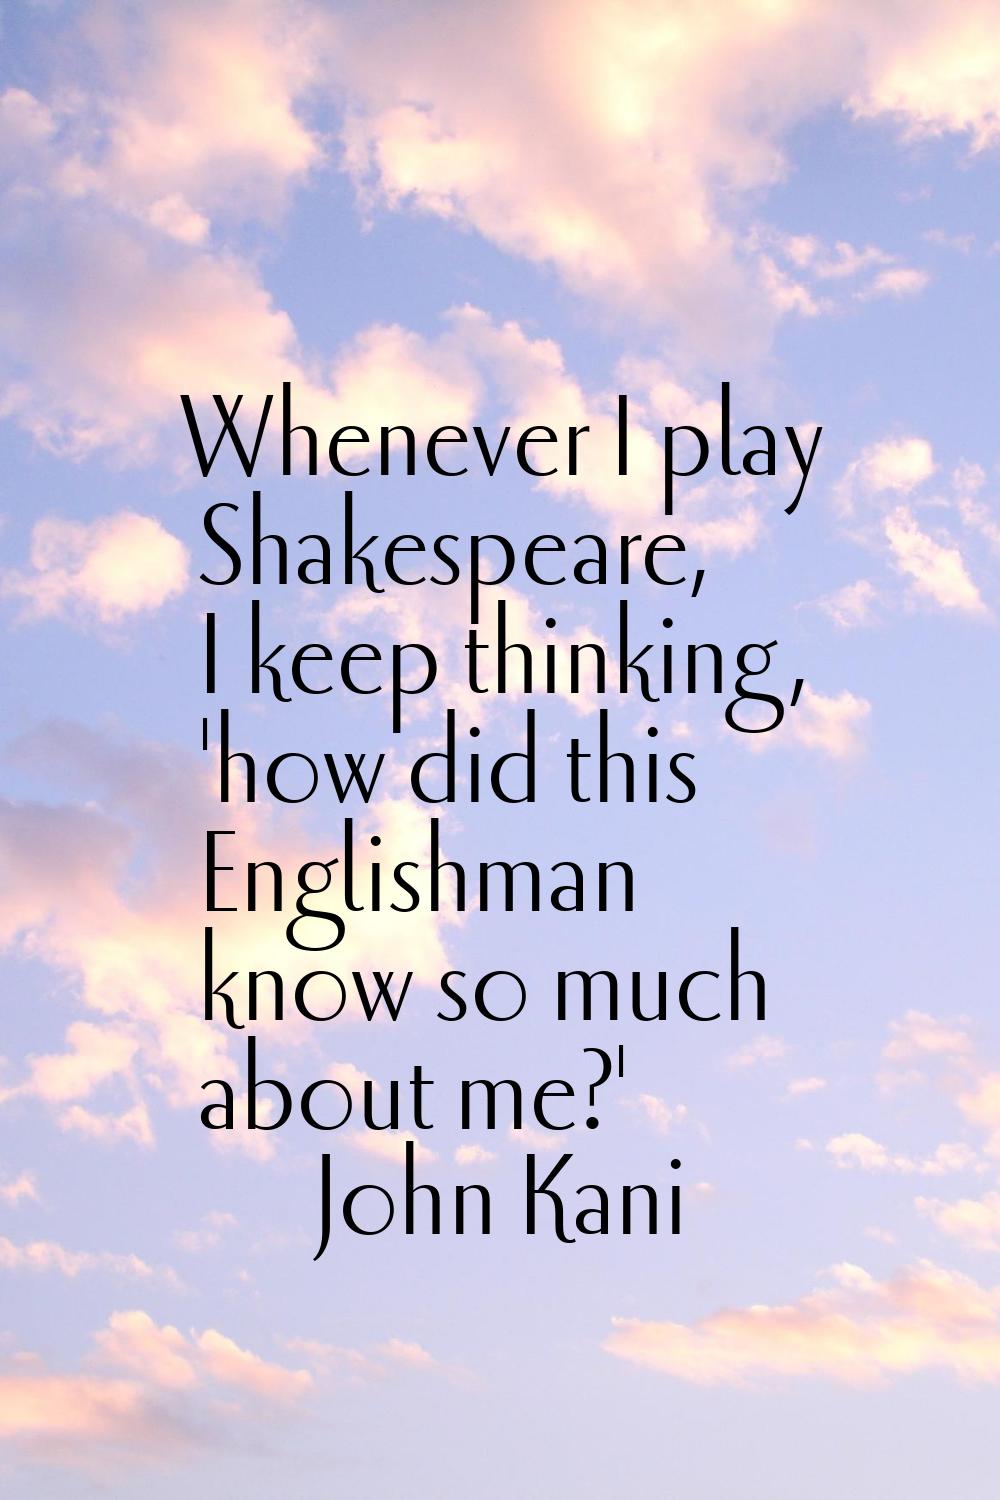 Whenever I play Shakespeare, I keep thinking, 'how did this Englishman know so much about me?'